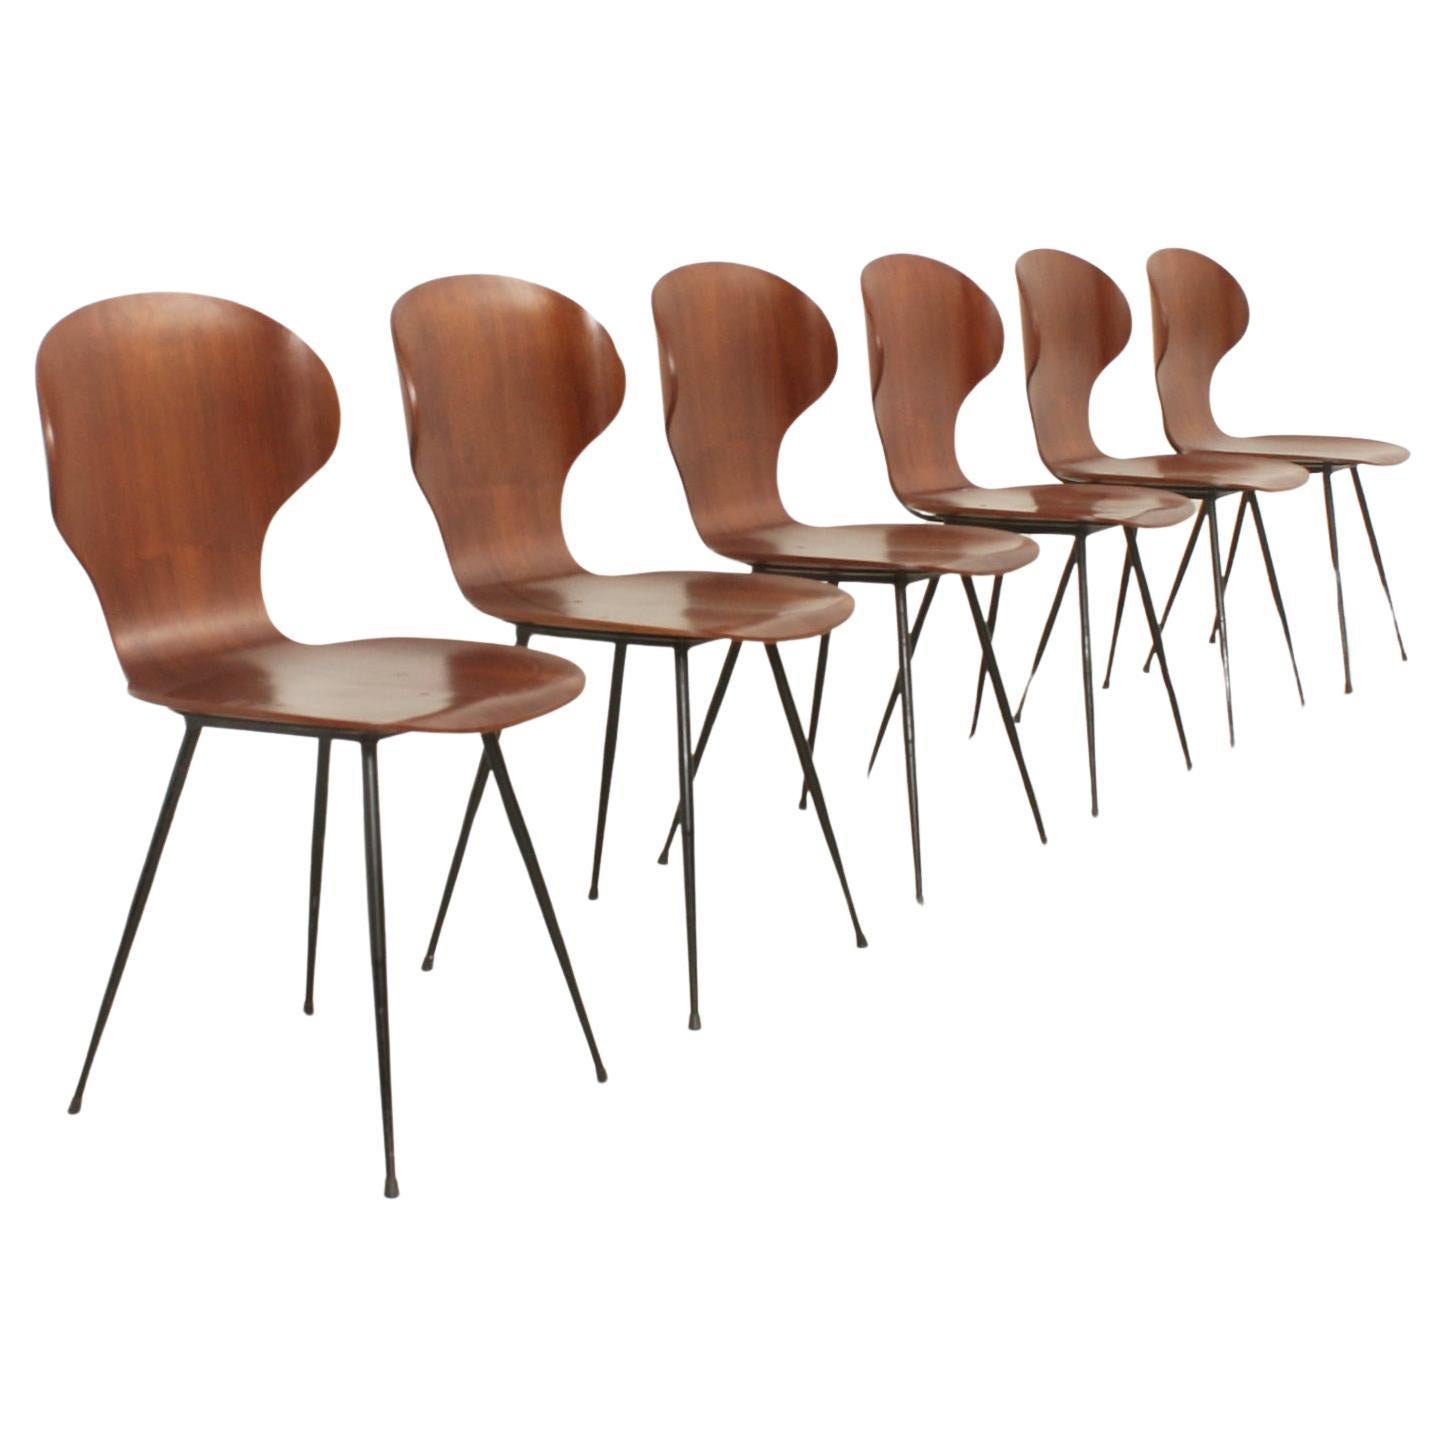 Set of Six Plywood Side Chairs by Carlo Ratti, Italy, 1950's